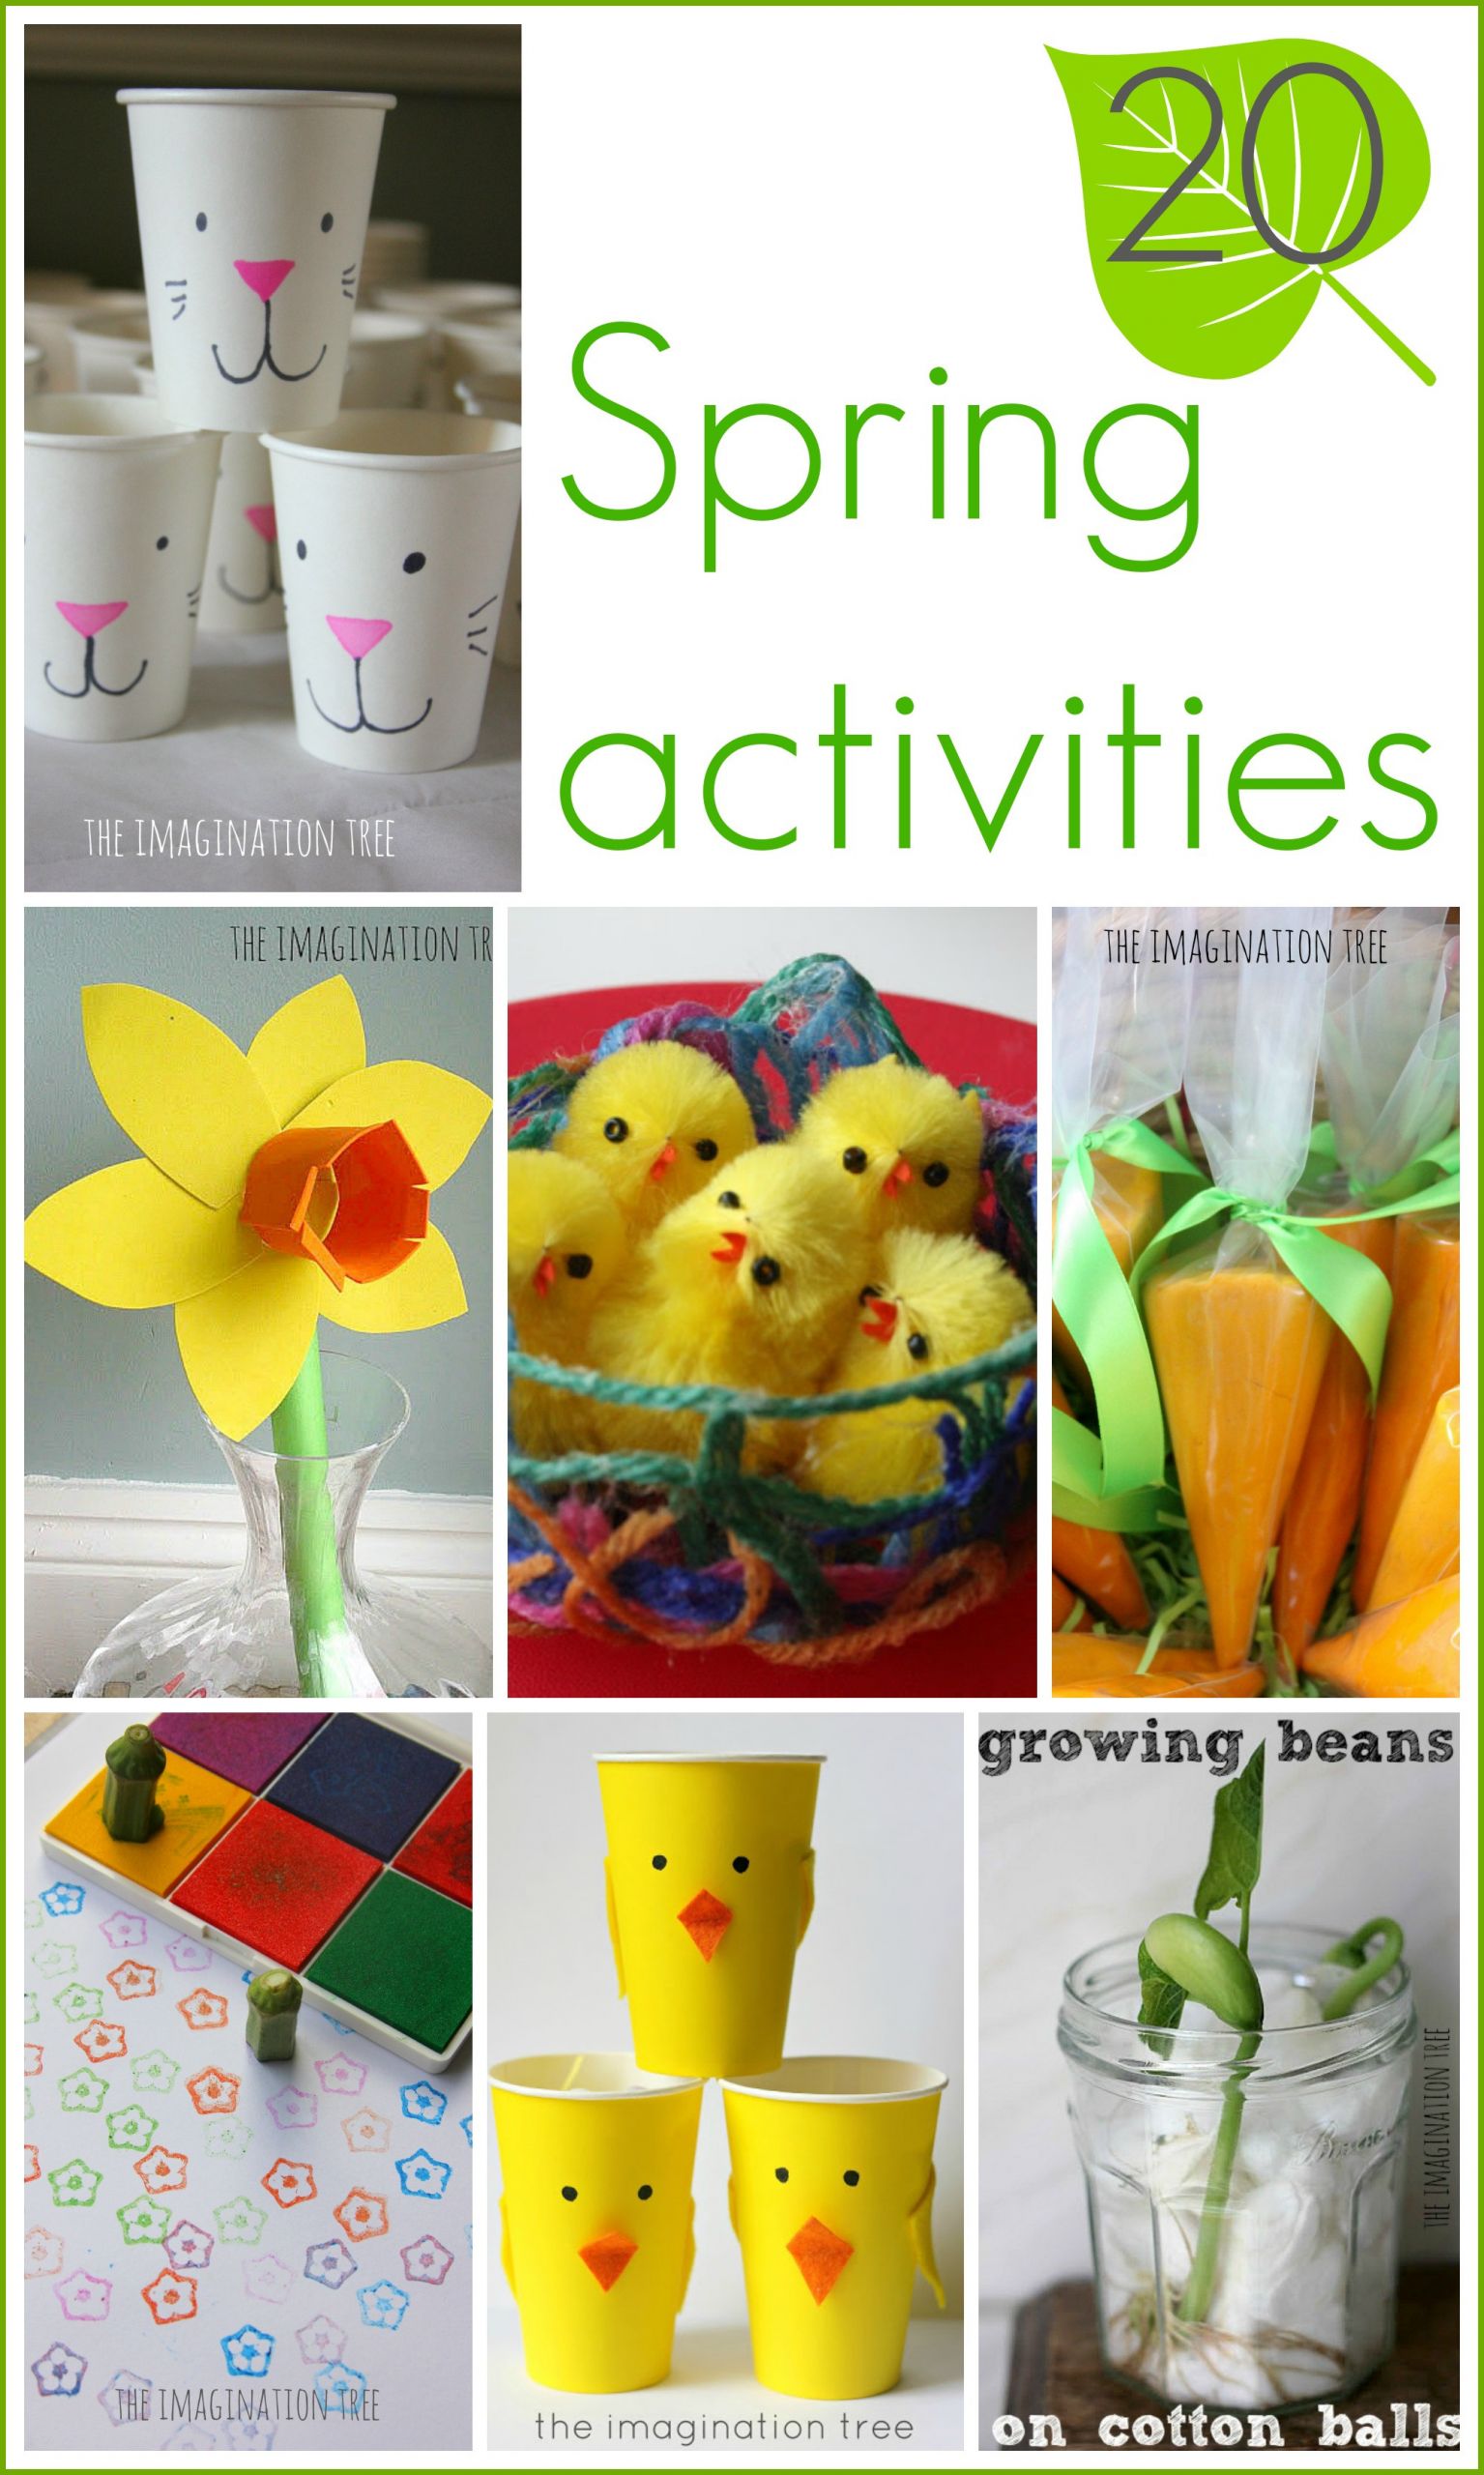 Spring Ideas For Kindergarten
 15 Spring Activities for Kids The Imagination Tree